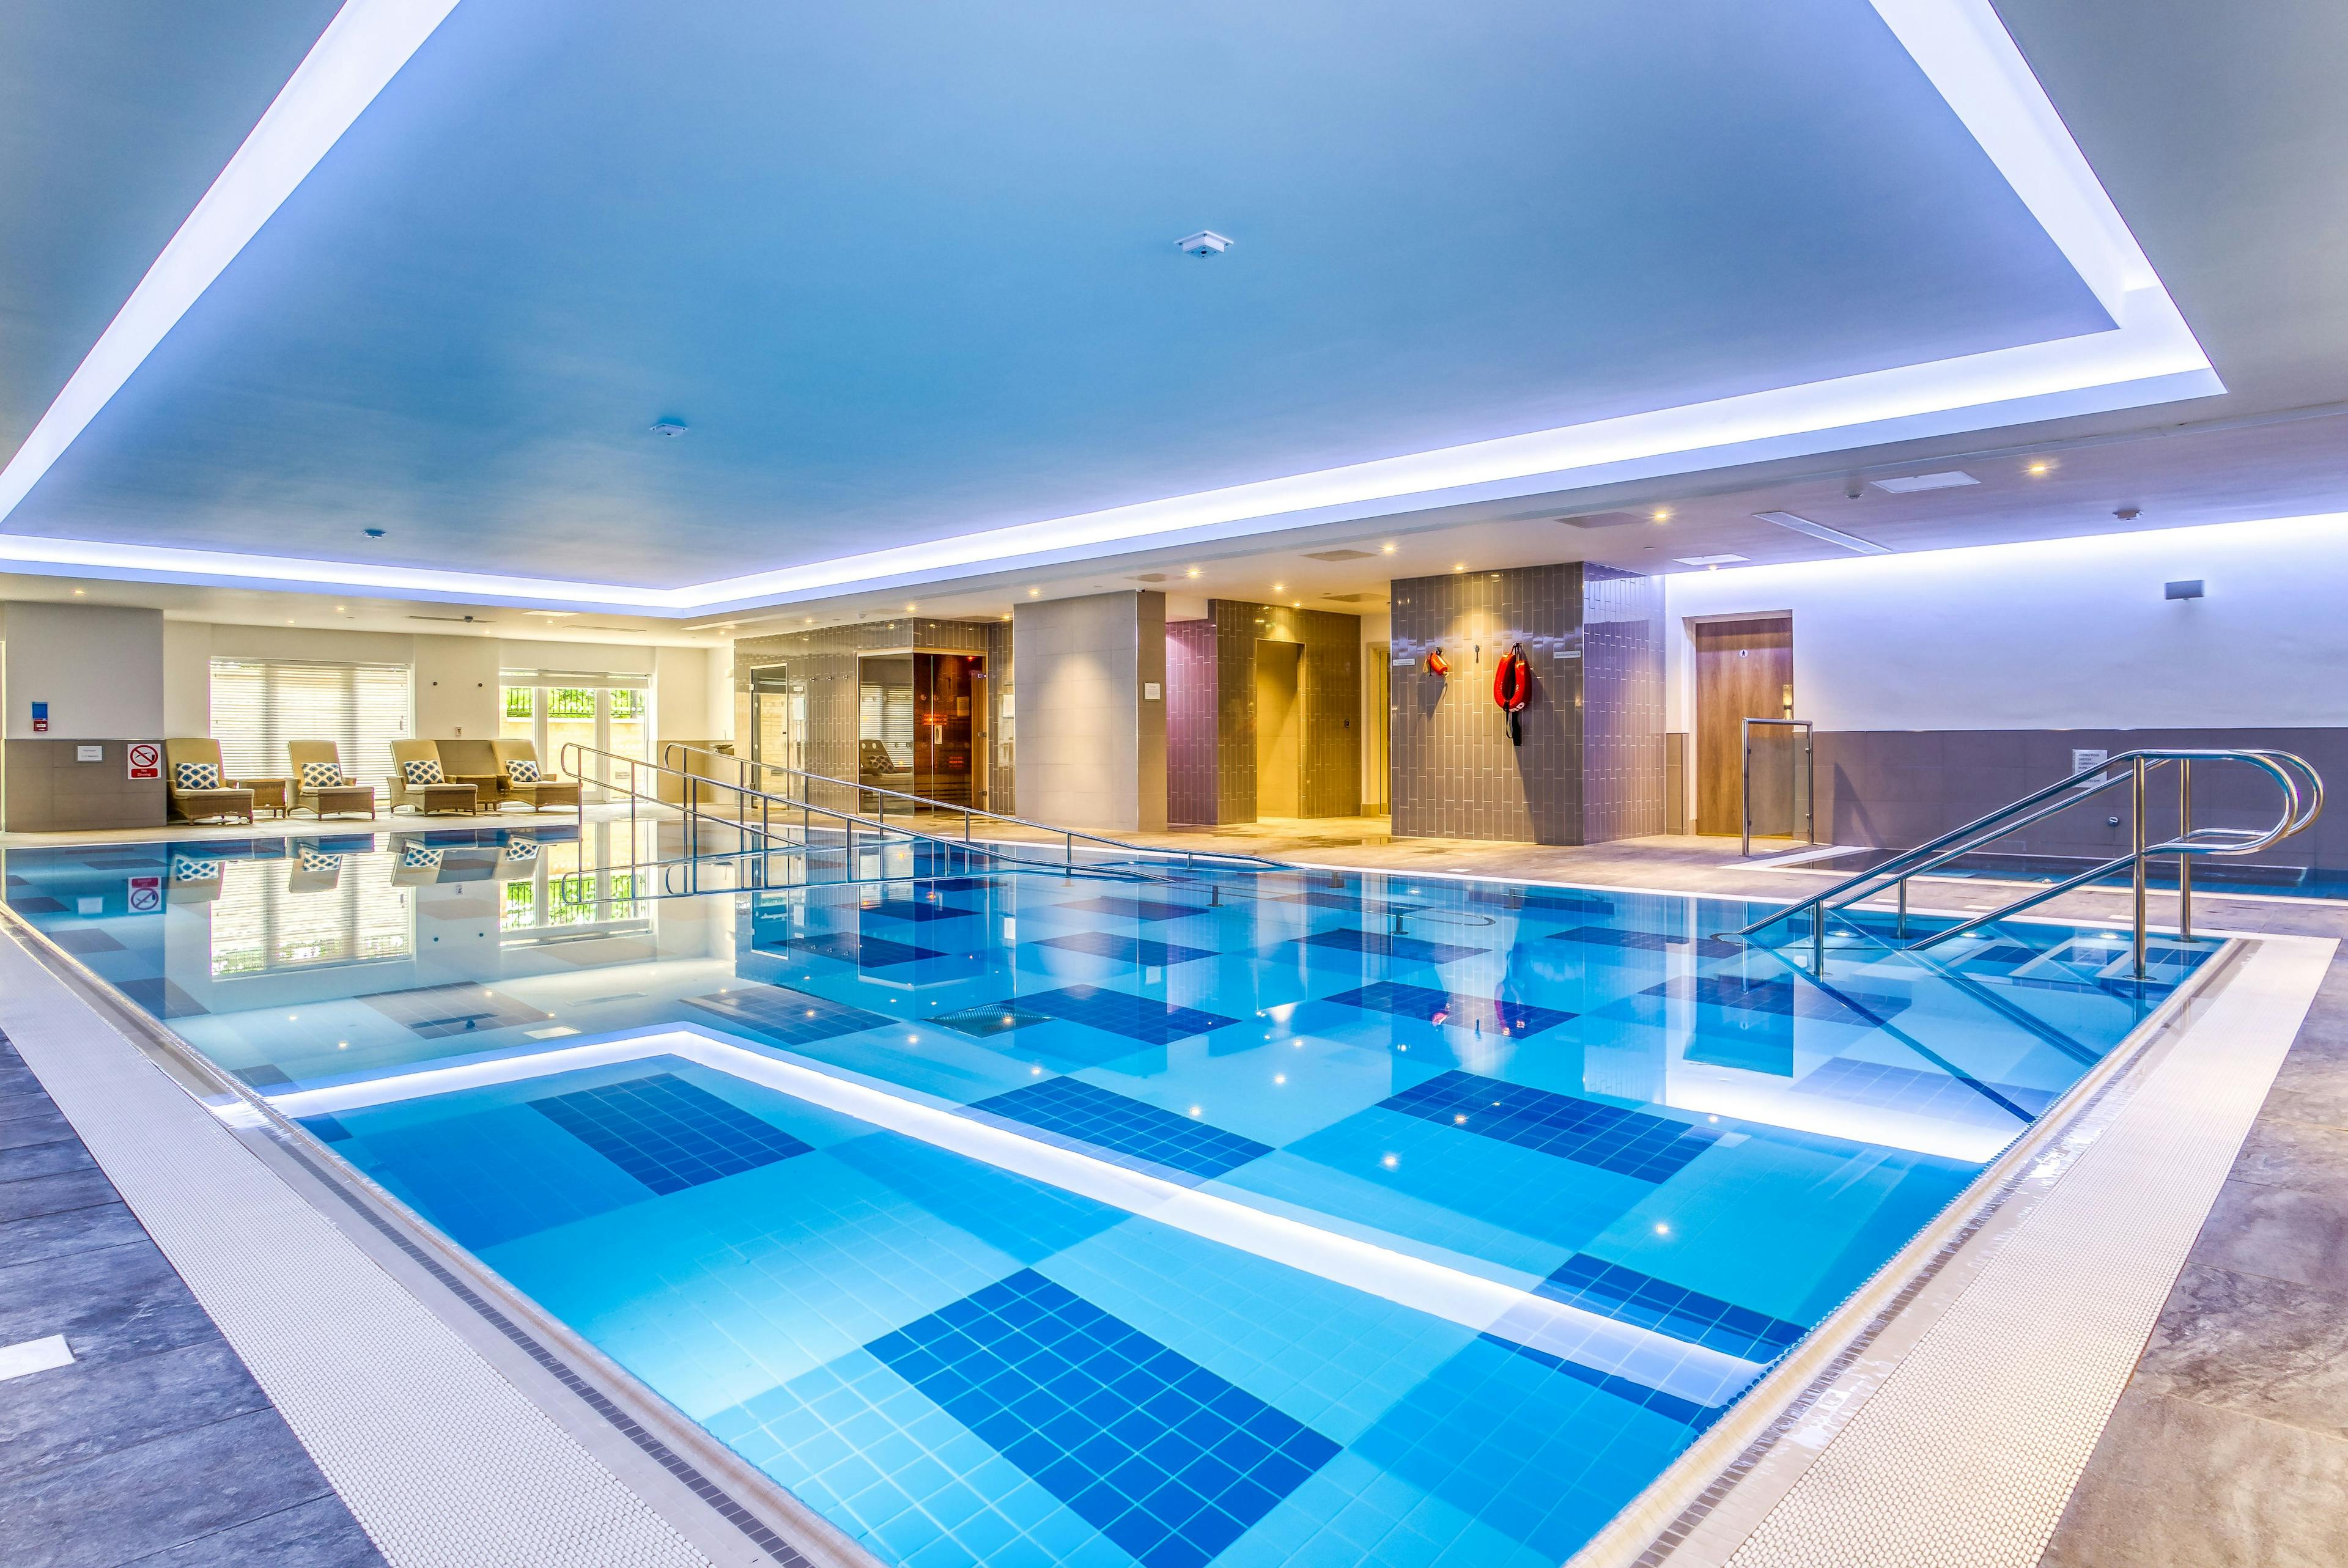 Swimming pool of Wood Norton care home in Evesham, Worcestershire